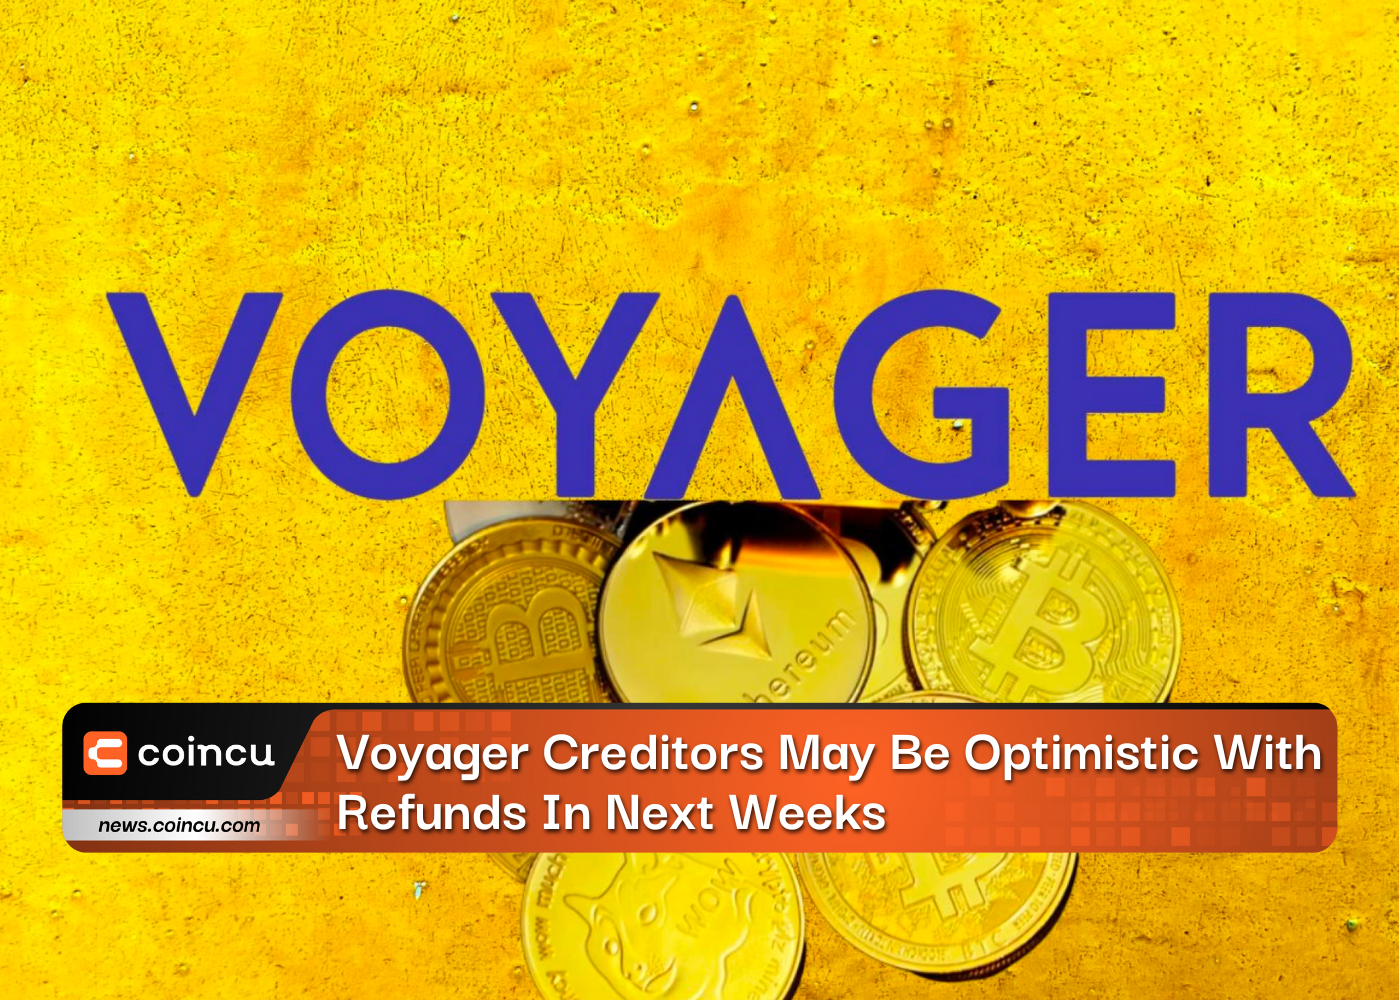 Voyager Creditors May Be Optimistic With Refunds In Next Weeks